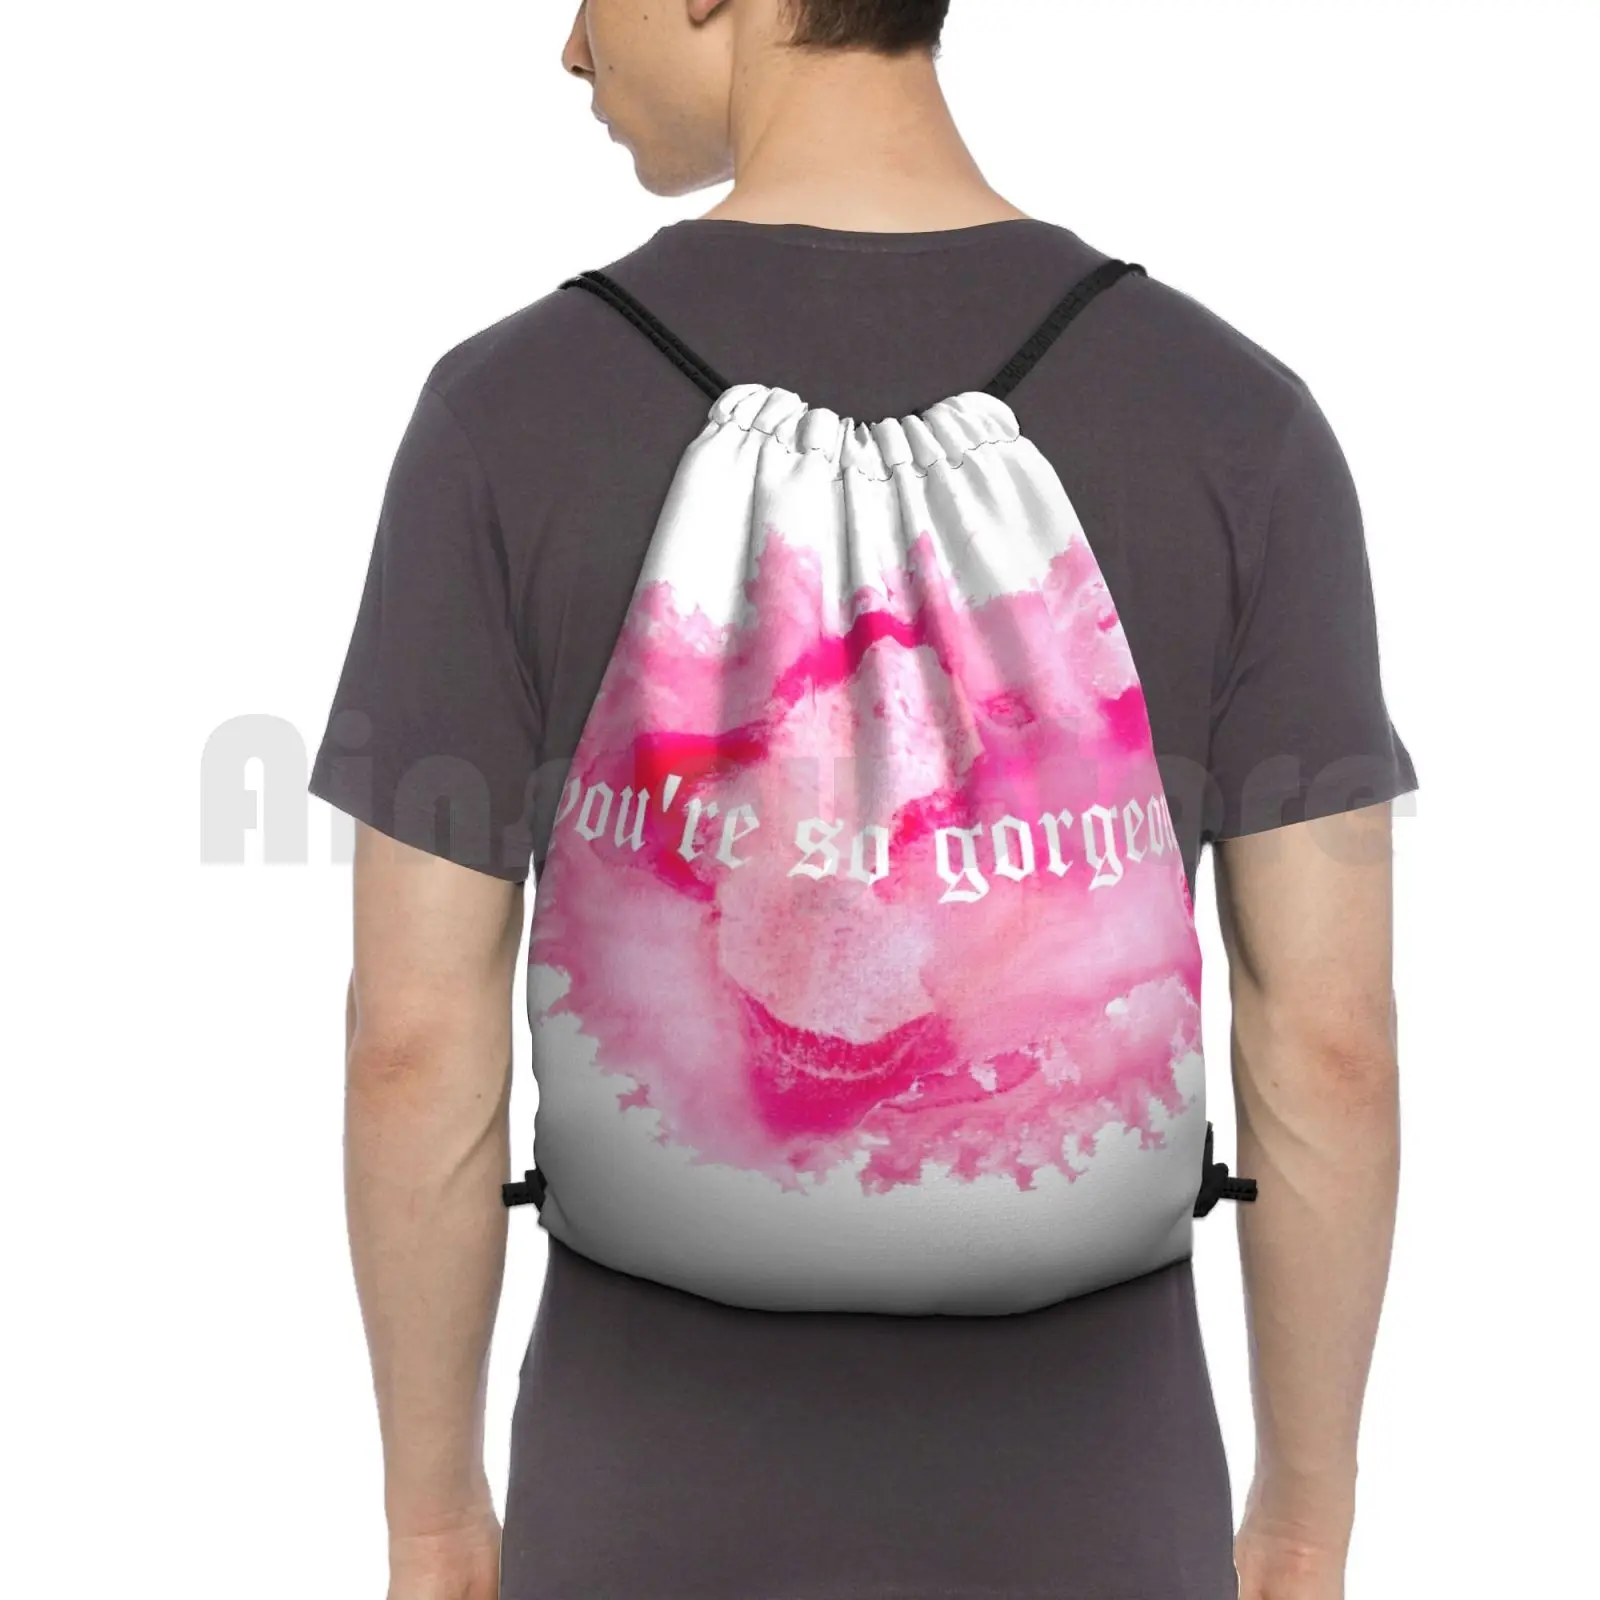 

Backpack Drawstring Bag Riding Climbing Gym Bag Reputation Rep Look What You Made Me Do So It Goes Lyric Purple Water Color